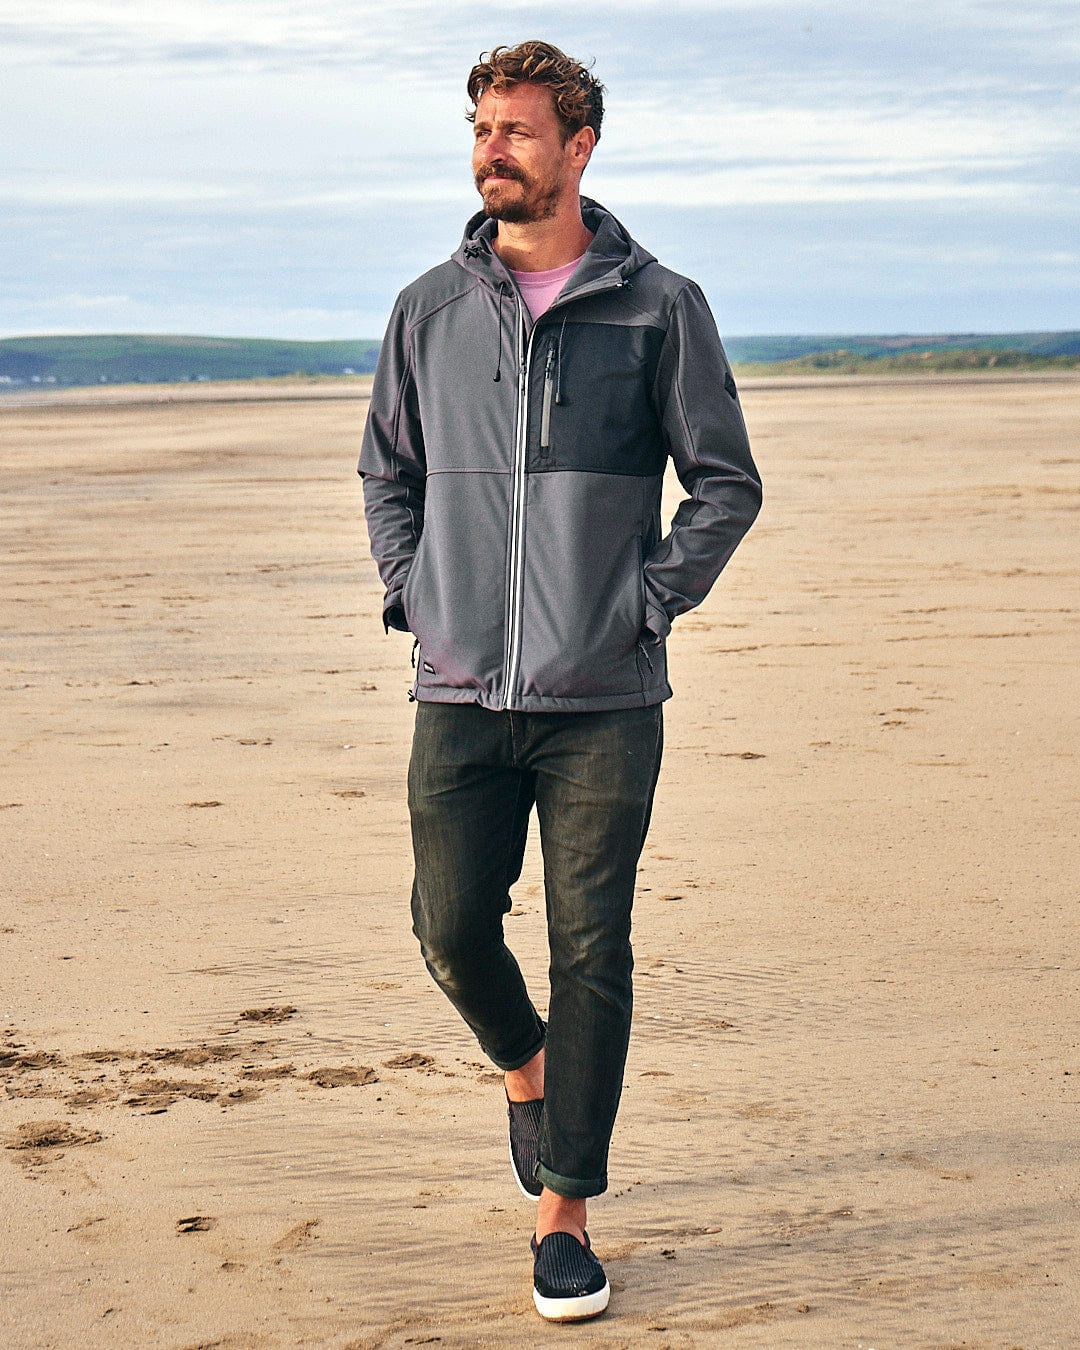 A man strolling along the beach in a Saltrock Munros - Mens Softshell Jacket - Grey, which features zip pockets and is made of water-resistant fabric.